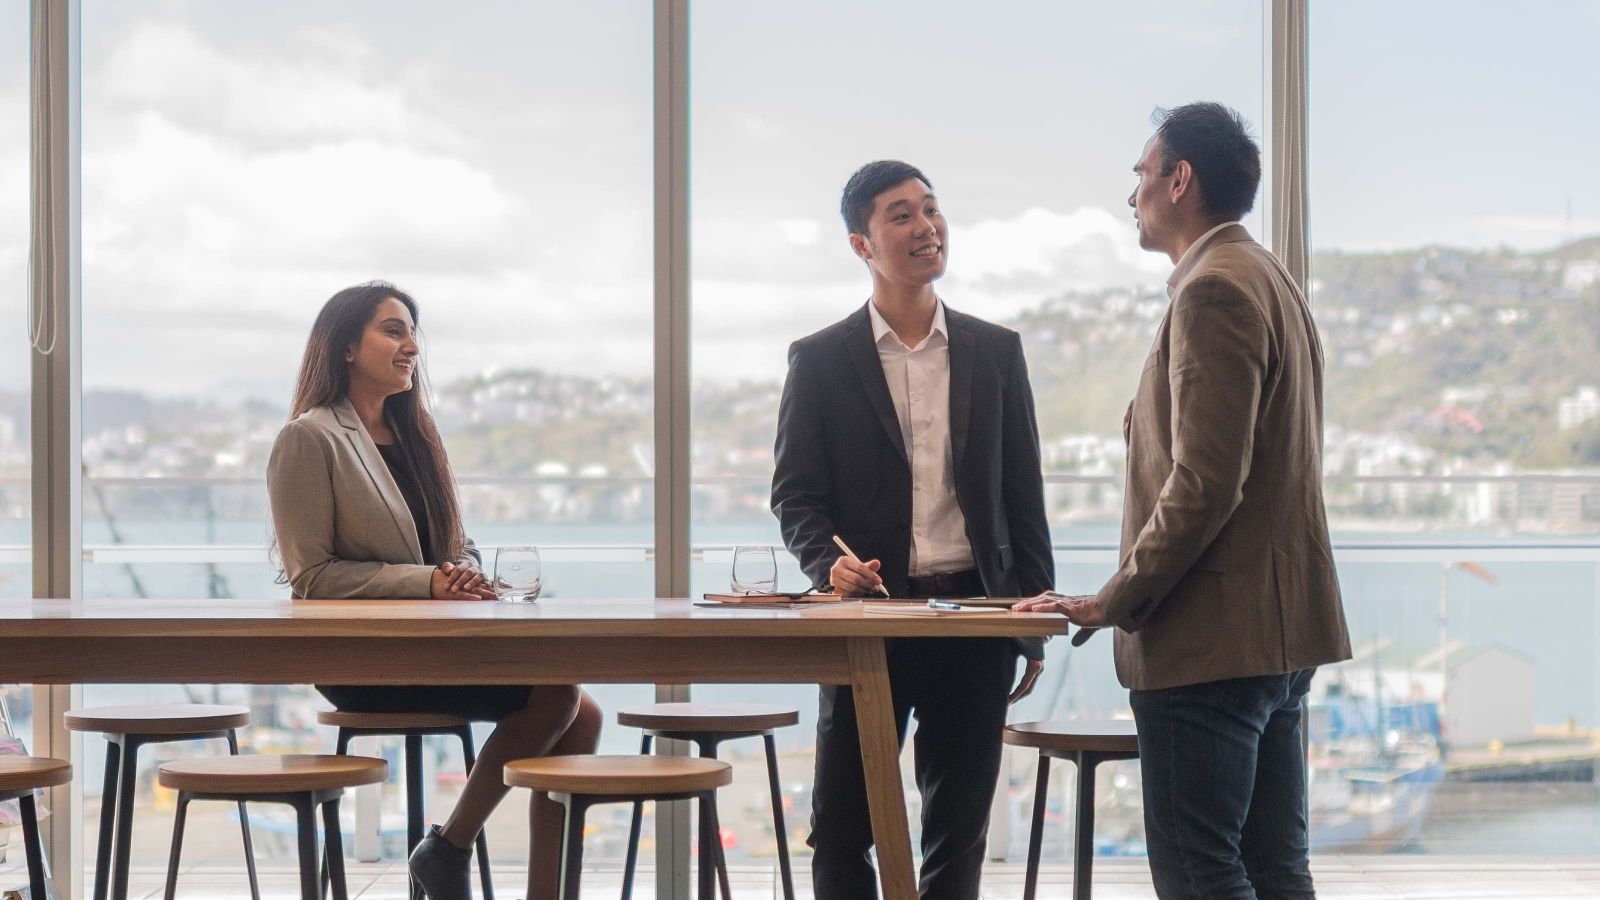 Three profesisonal programmes students meet in a modern office with Wellington Harbour in the background.